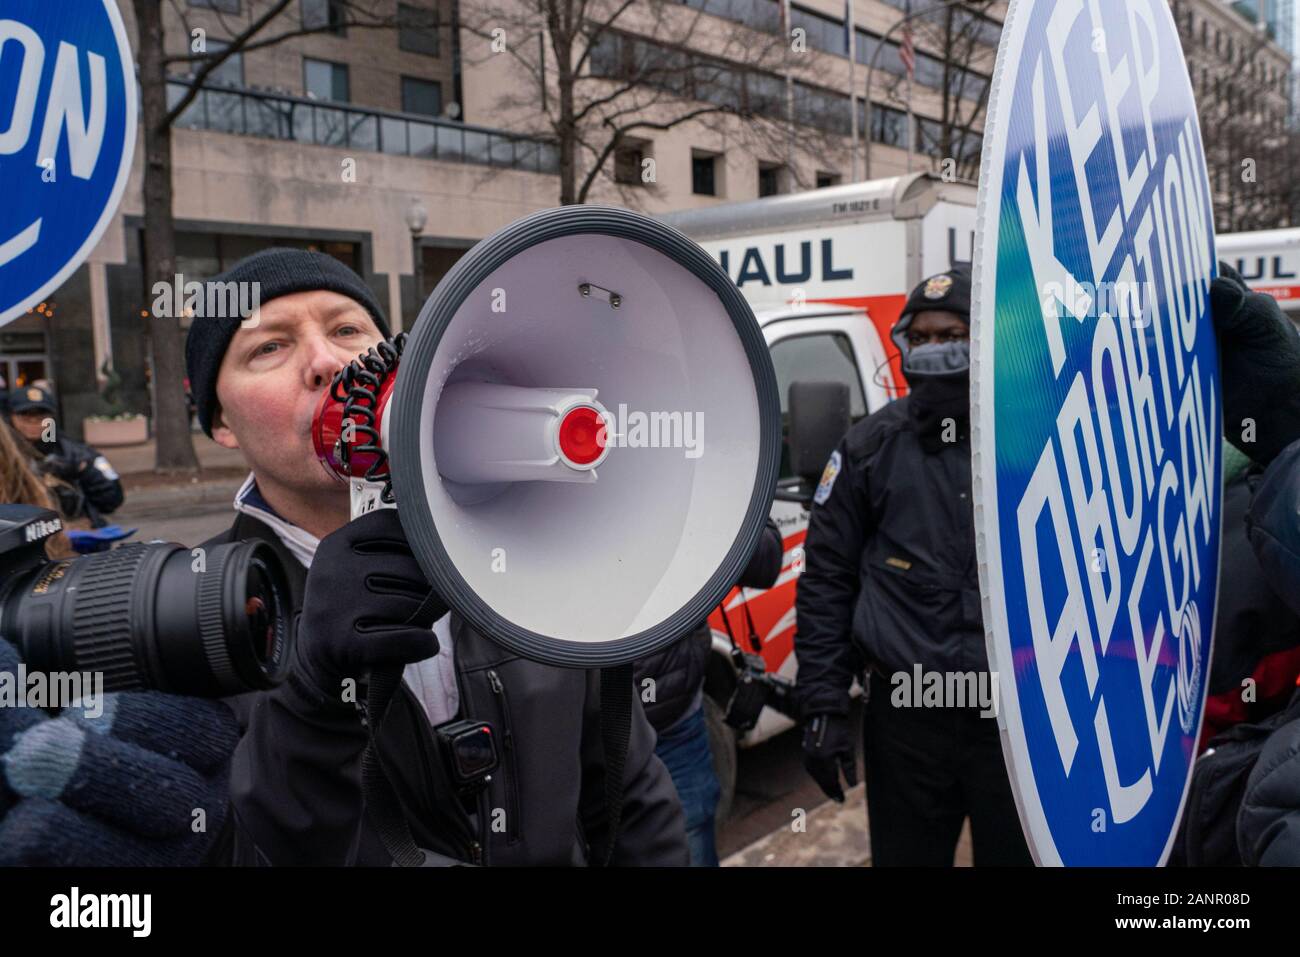 Washington DC, USA. 18th Jan, 2020. A pro-life protester shouts in a megaphone at pro-choice marchers as thousands turn out for the fourth annual Women's March rebuking President Donald Trump and his administration in Washington, DC on Saturday, January 18, 2020. Photo by Ken Cedeno/UPI. Credit: UPI/Alamy Live News Stock Photo